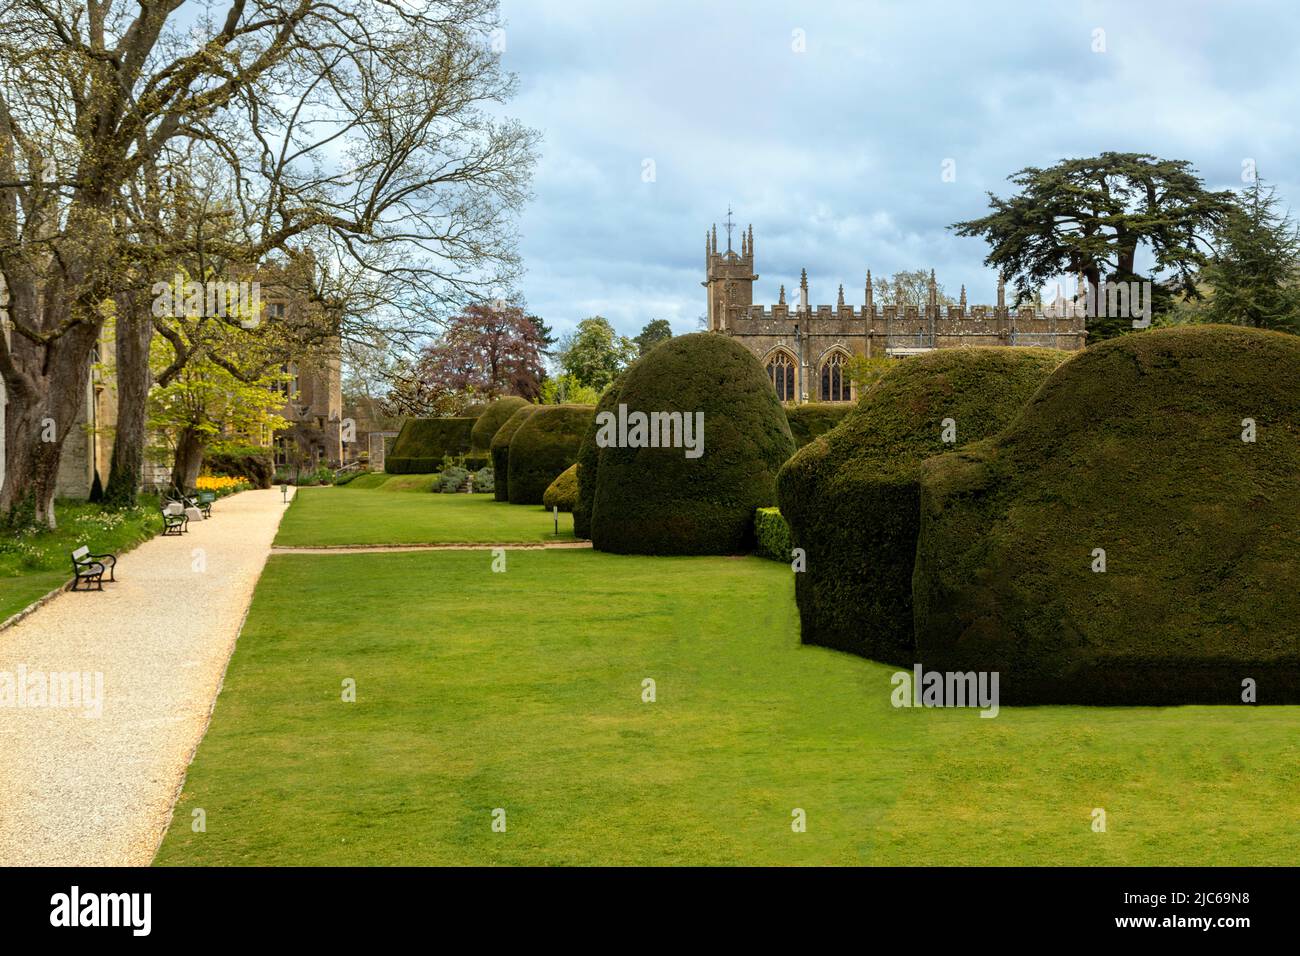 St Mary's Chapel, a 15th century church, the burial place of Catherine Parr, viewed from Sudeley Castle, Gardens, Gloucestershire, England, UK. Stock Photo